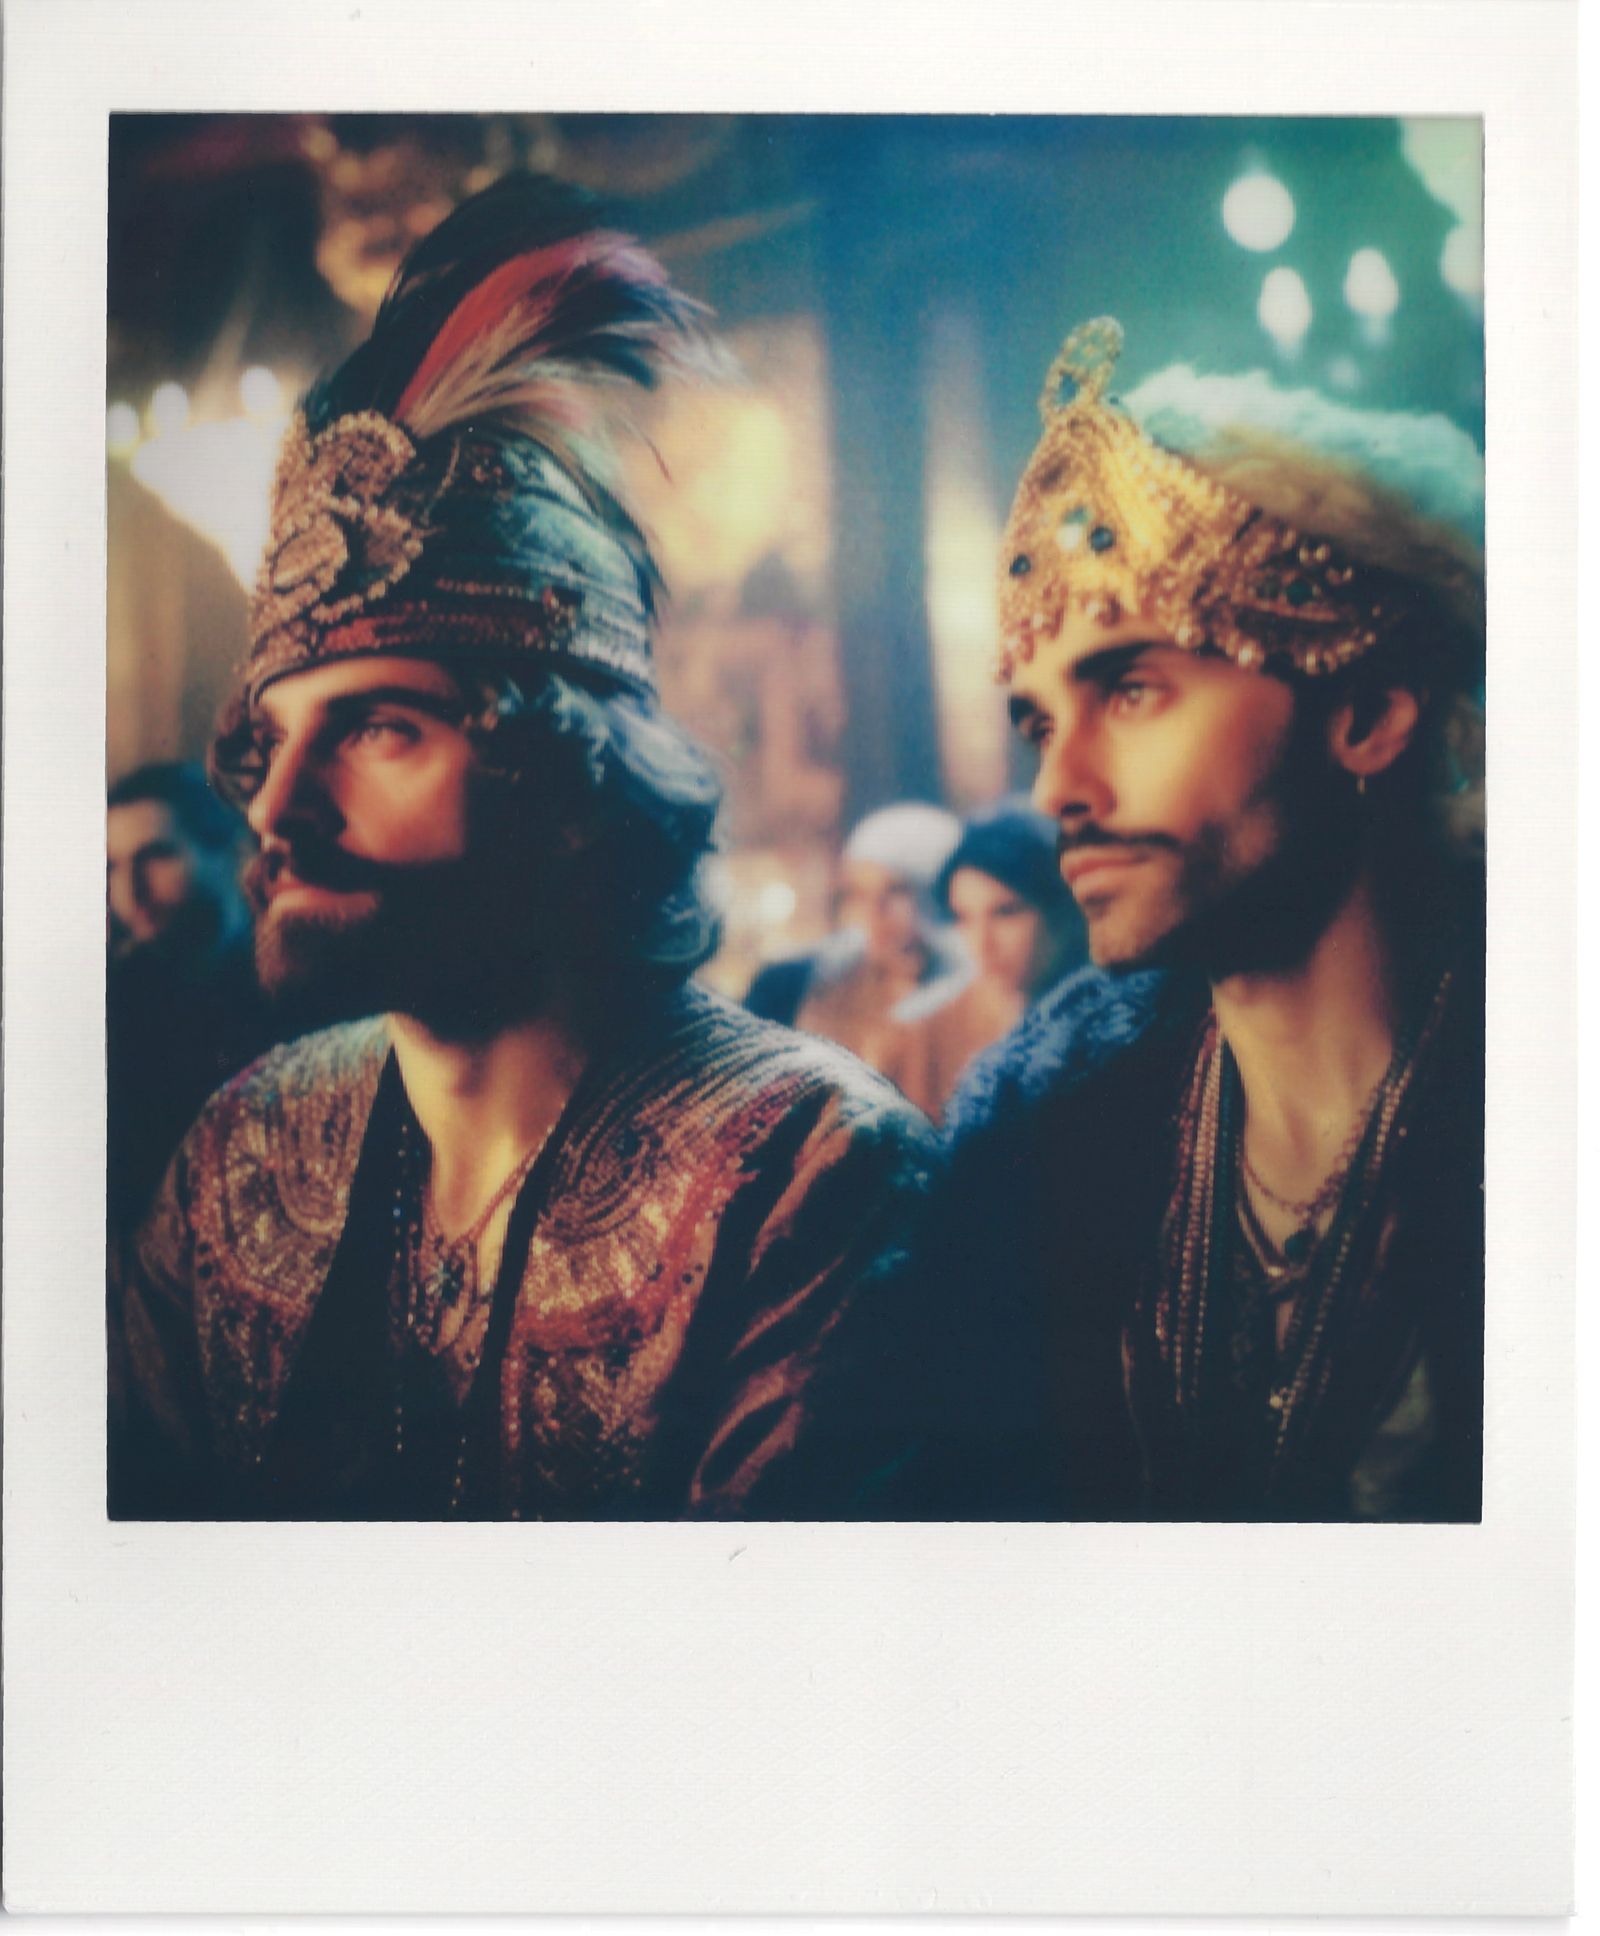 © Sarp Kerem Yavuz - Image from the Polaroids from the Ottoman Empire photography project